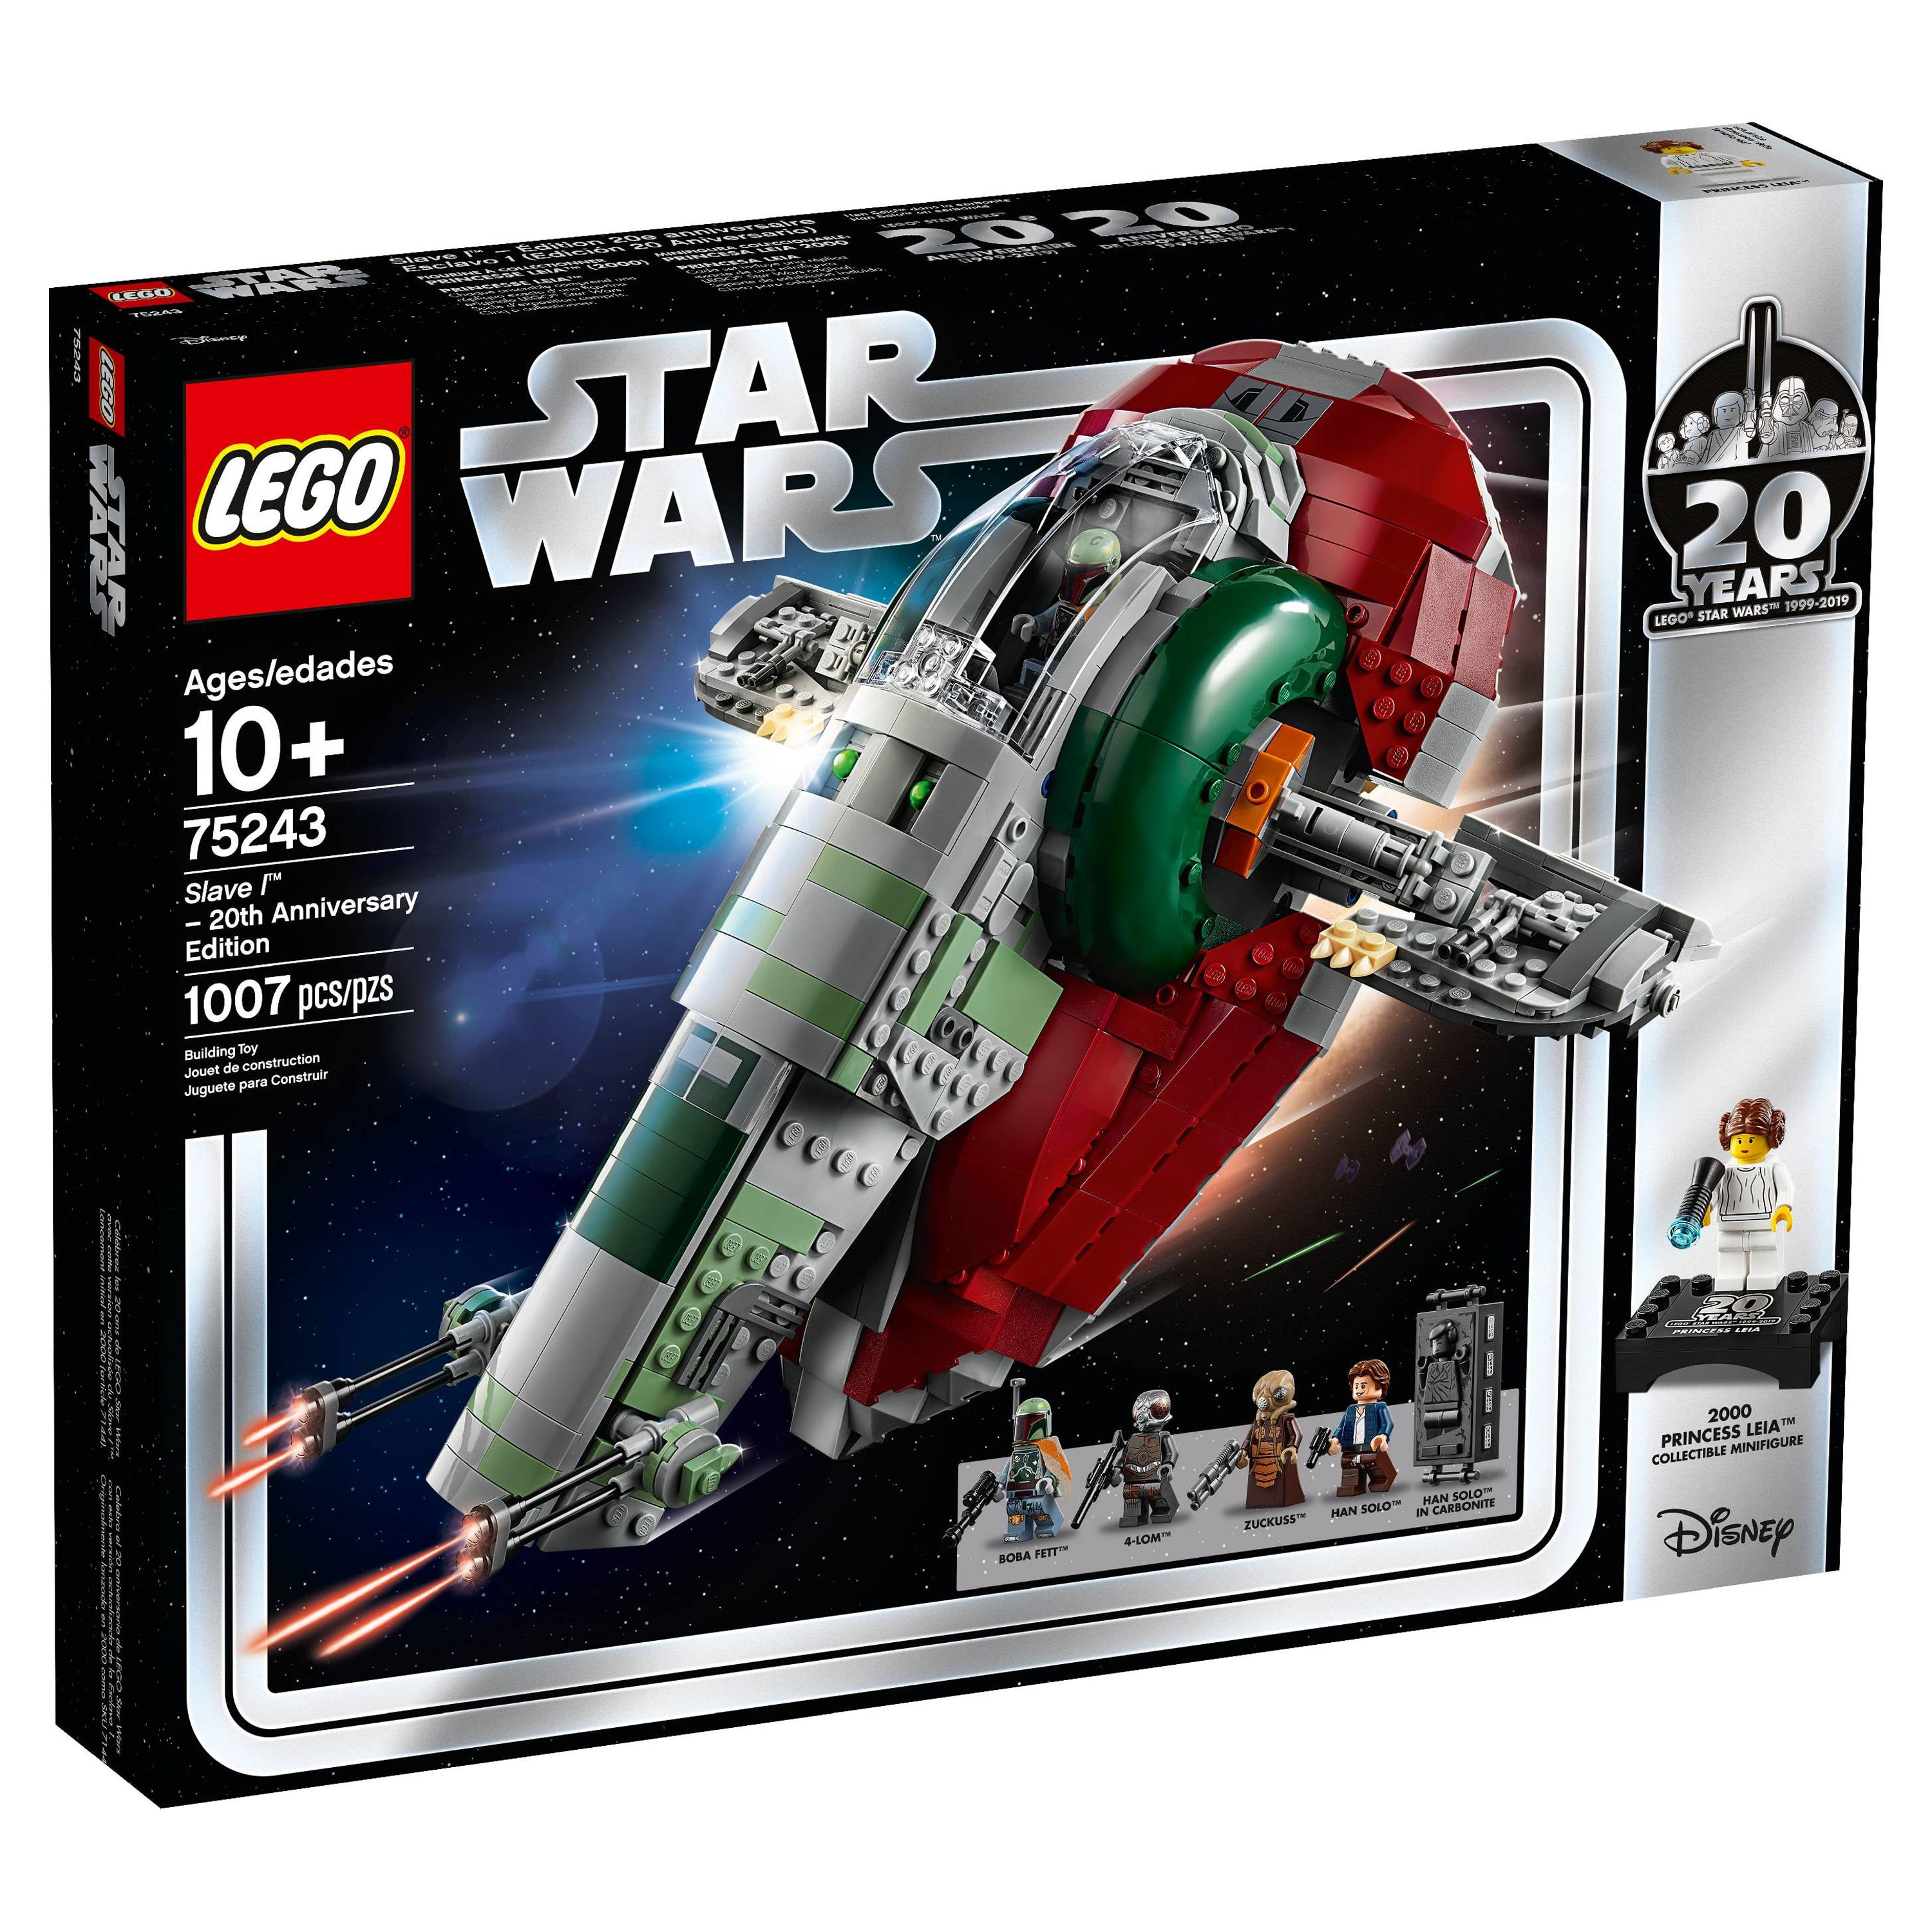 LEGO 75243 Star Wars Slave 20th Anniversary Collector Edition Collectible Model Building Kit - image 5 of 8